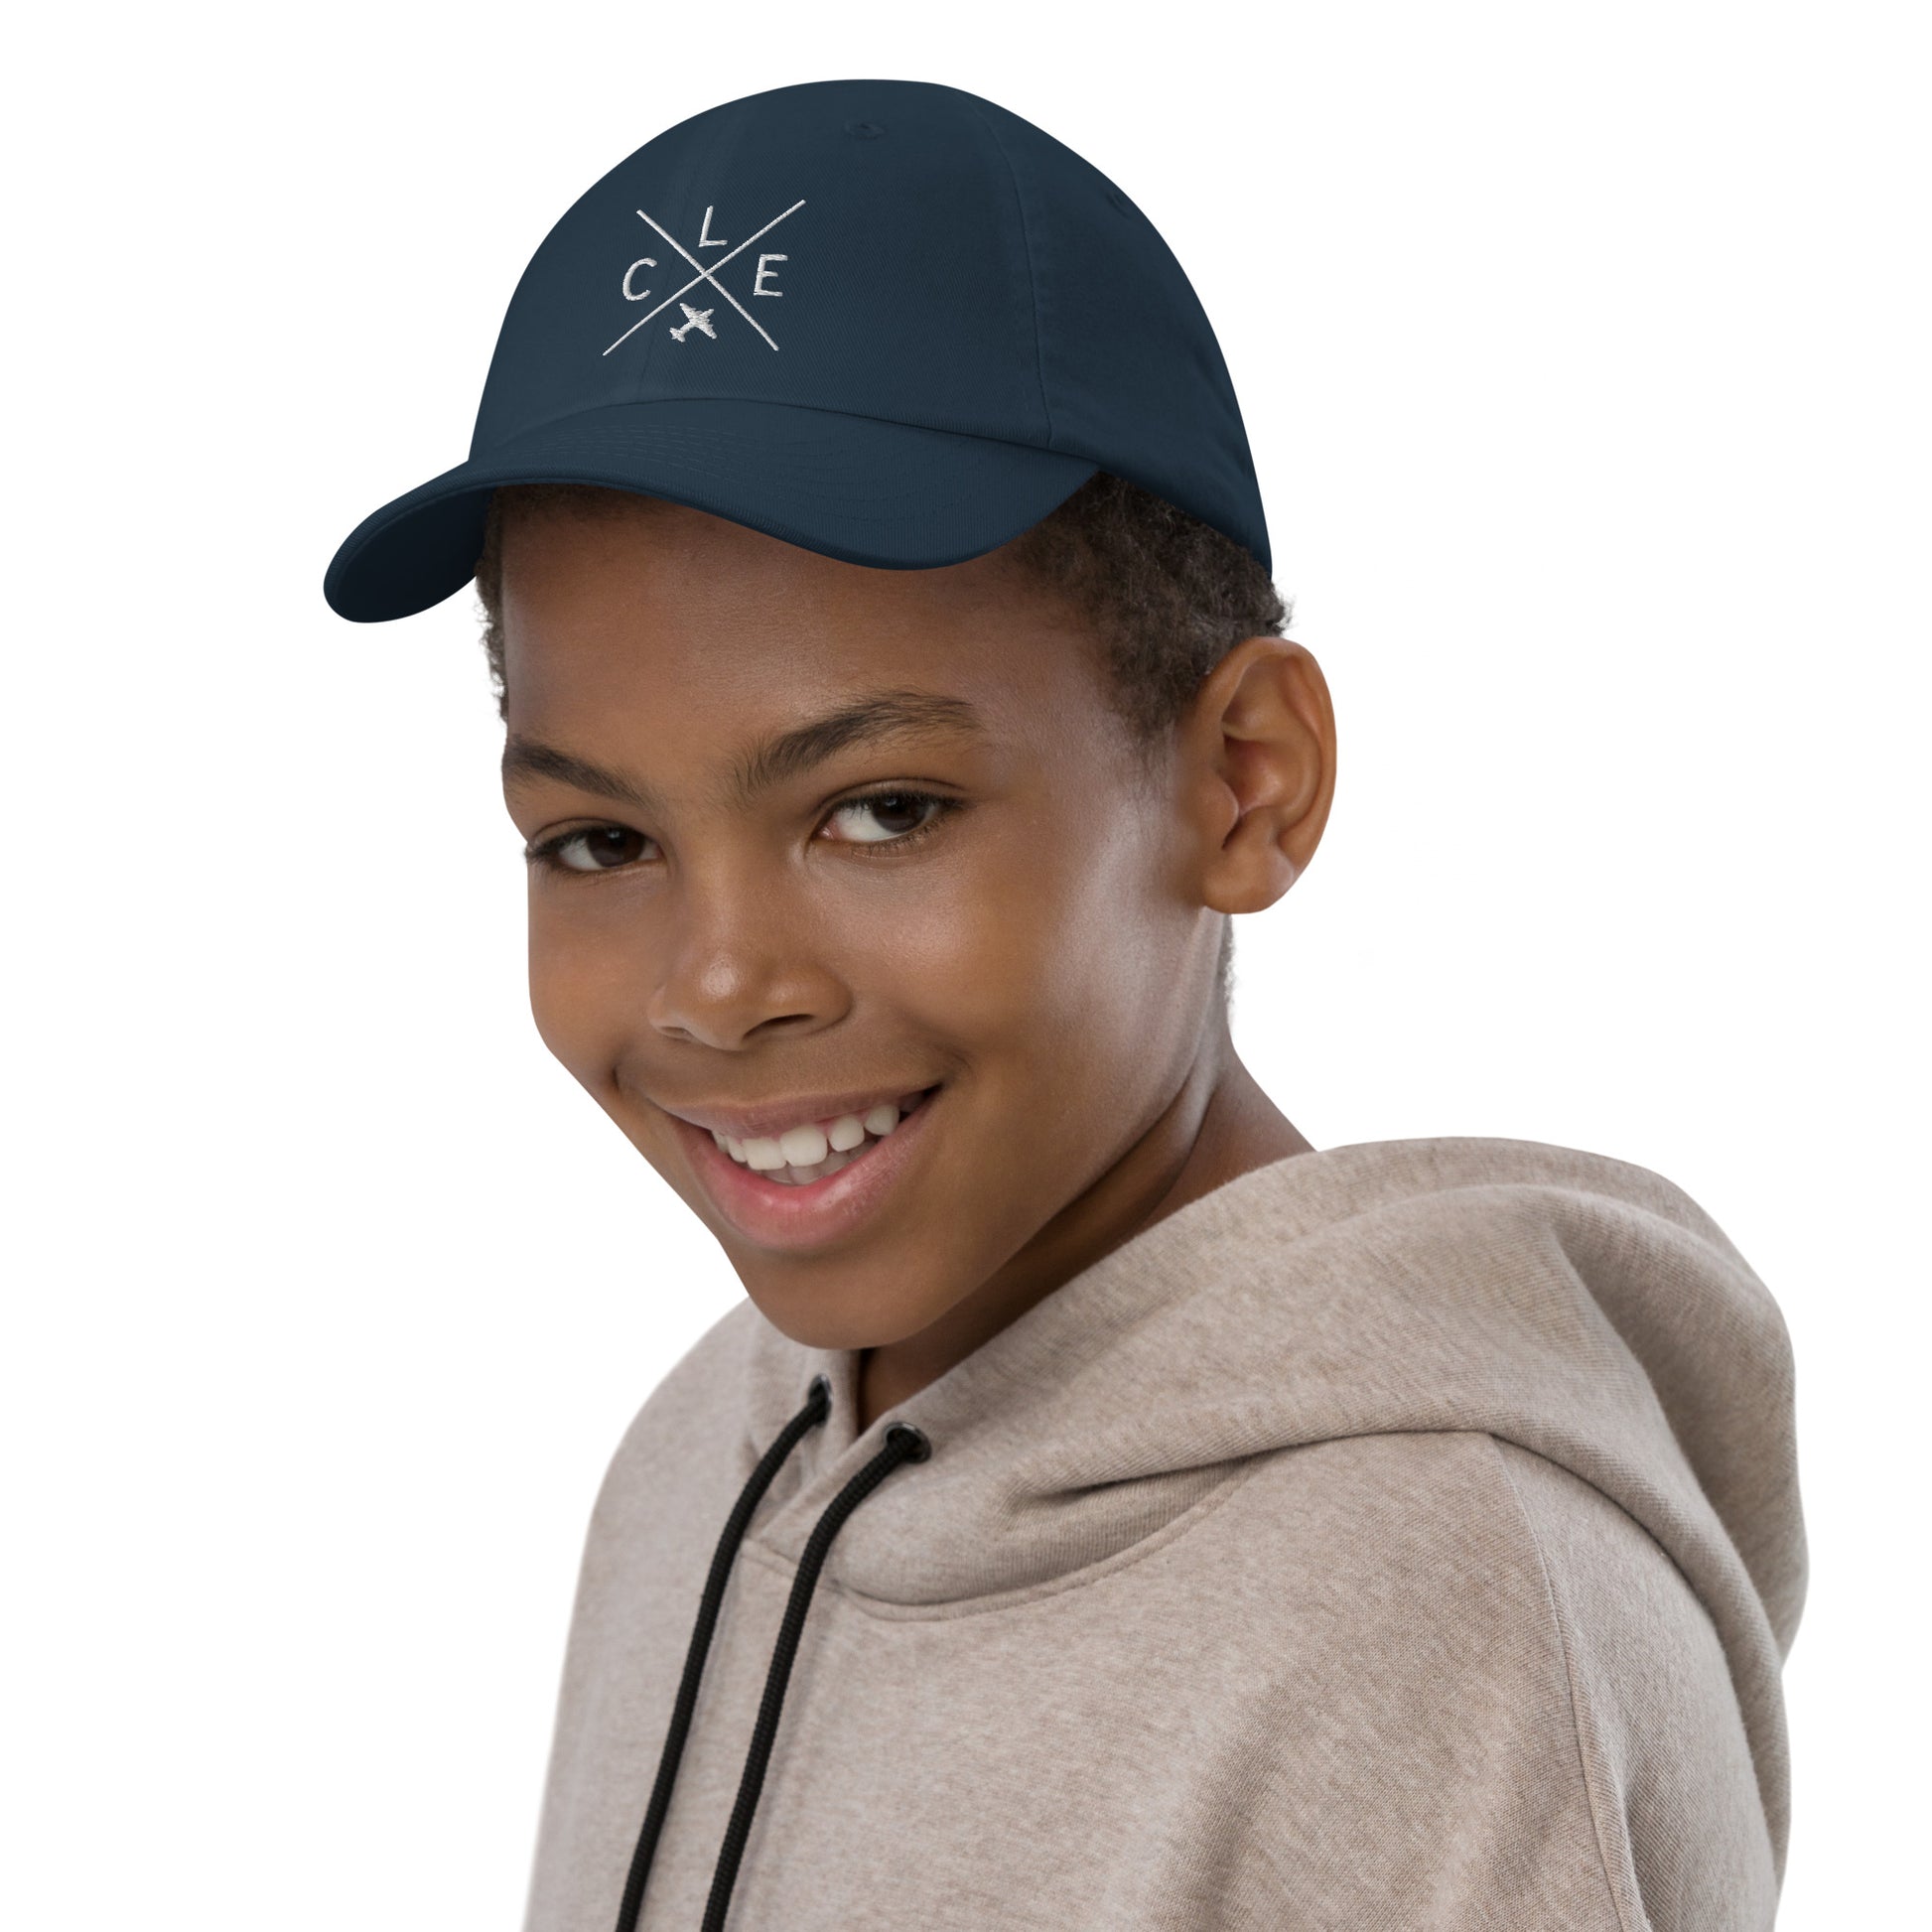 Crossed-X Kid's Baseball Cap - White • CLE Cleveland • YHM Designs - Image 03